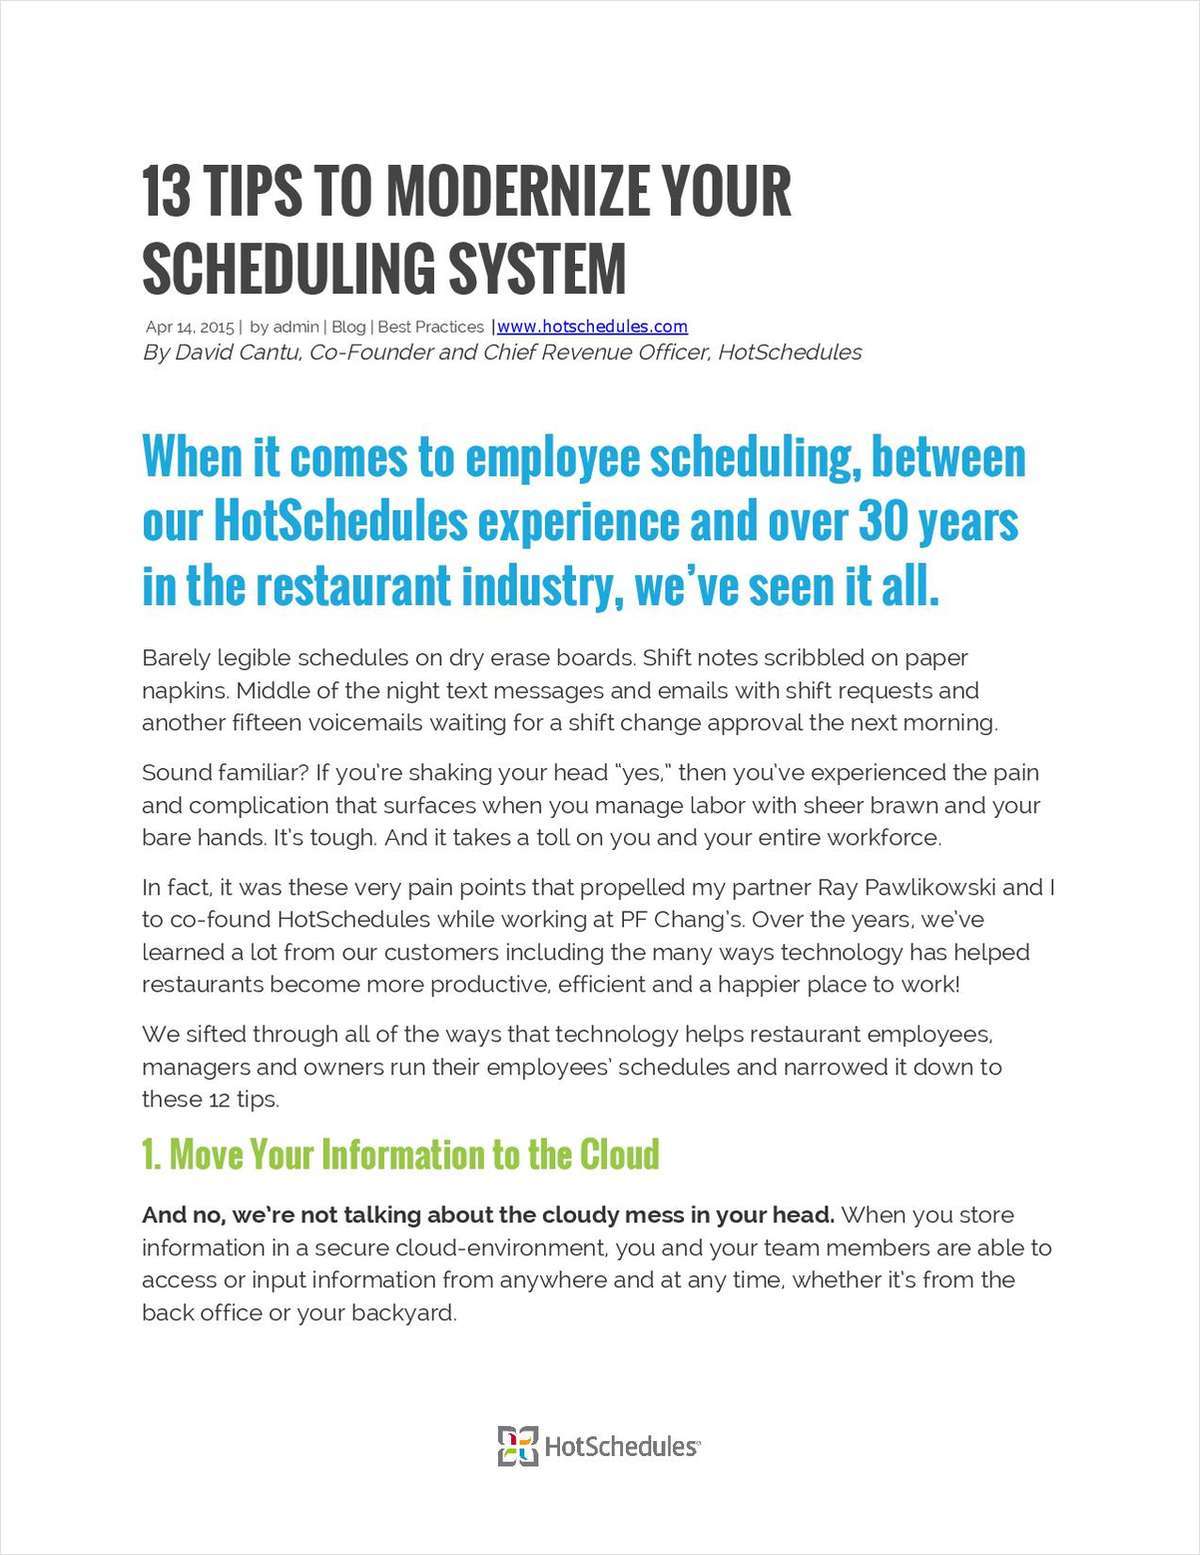 13 Tips to Modernize Your Scheduling System